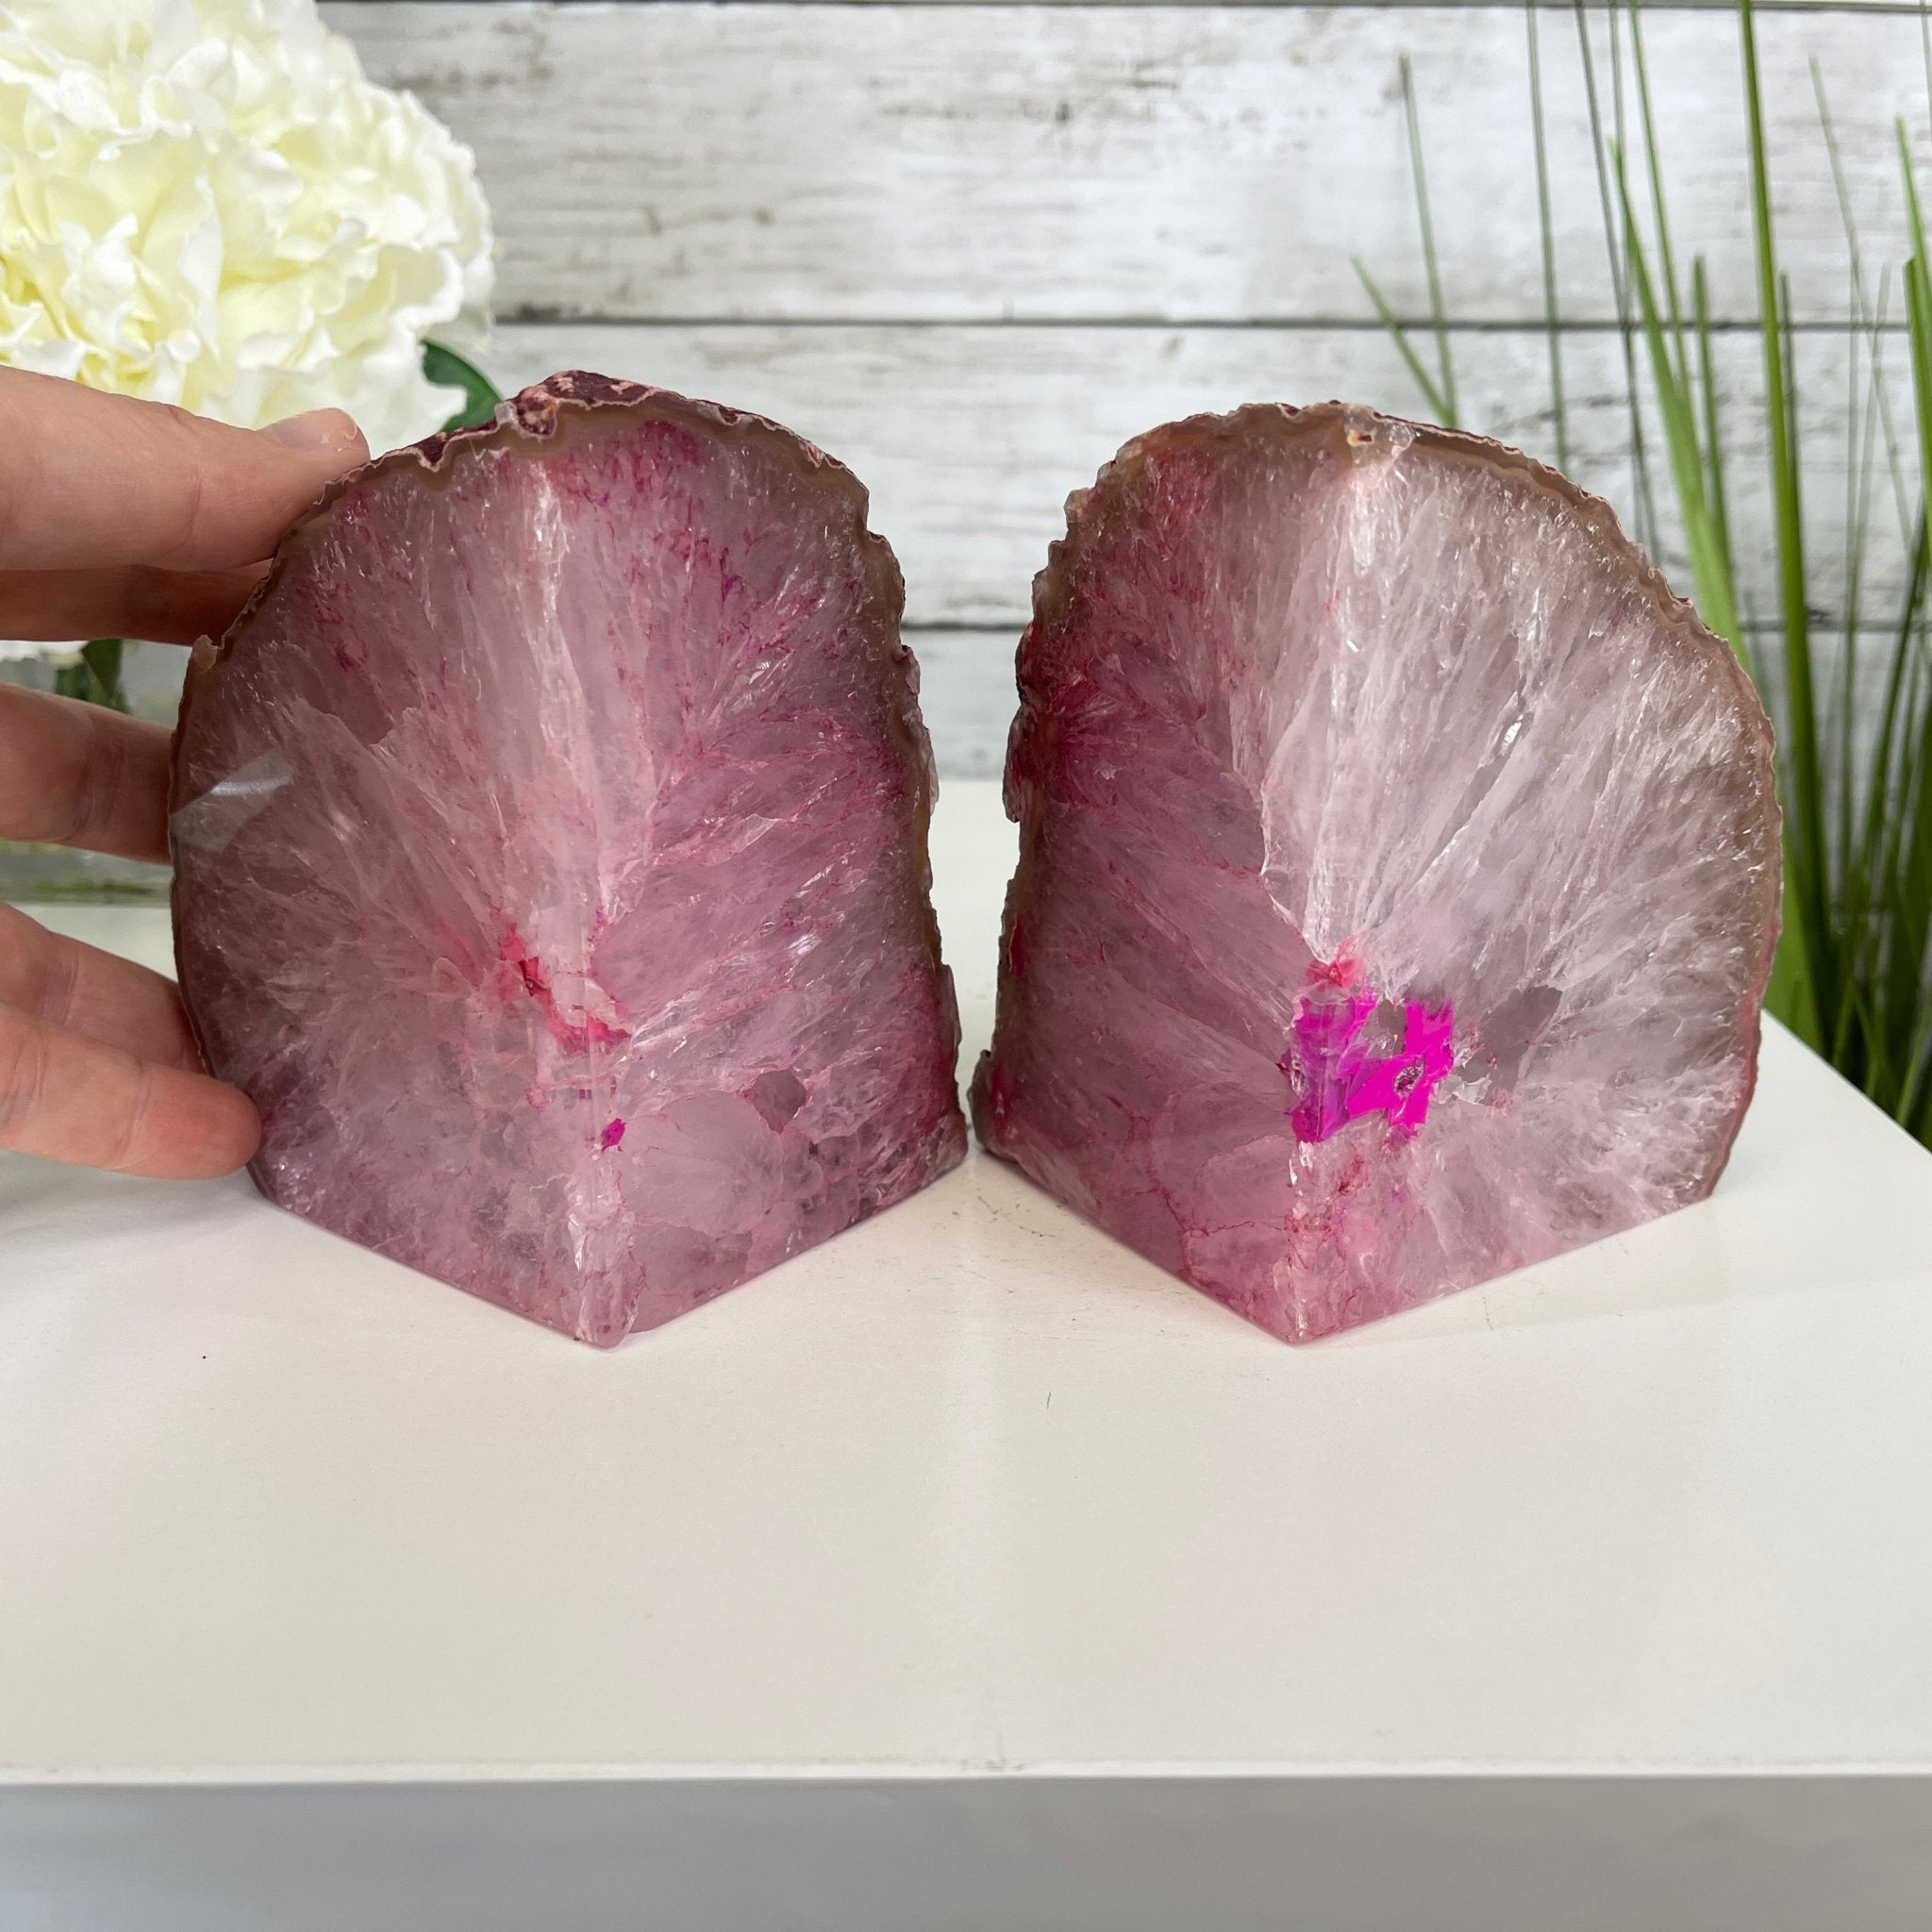 Pink Dyed Brazilian Agate Stone Bookends, 4.5" tall & 6 lbs #5151-0023 by Brazil Gems - Brazil GemsBrazil GemsPink Dyed Brazilian Agate Stone Bookends, 4.5" tall & 6 lbs #5151-0023 by Brazil GemsBookends5151PA-023